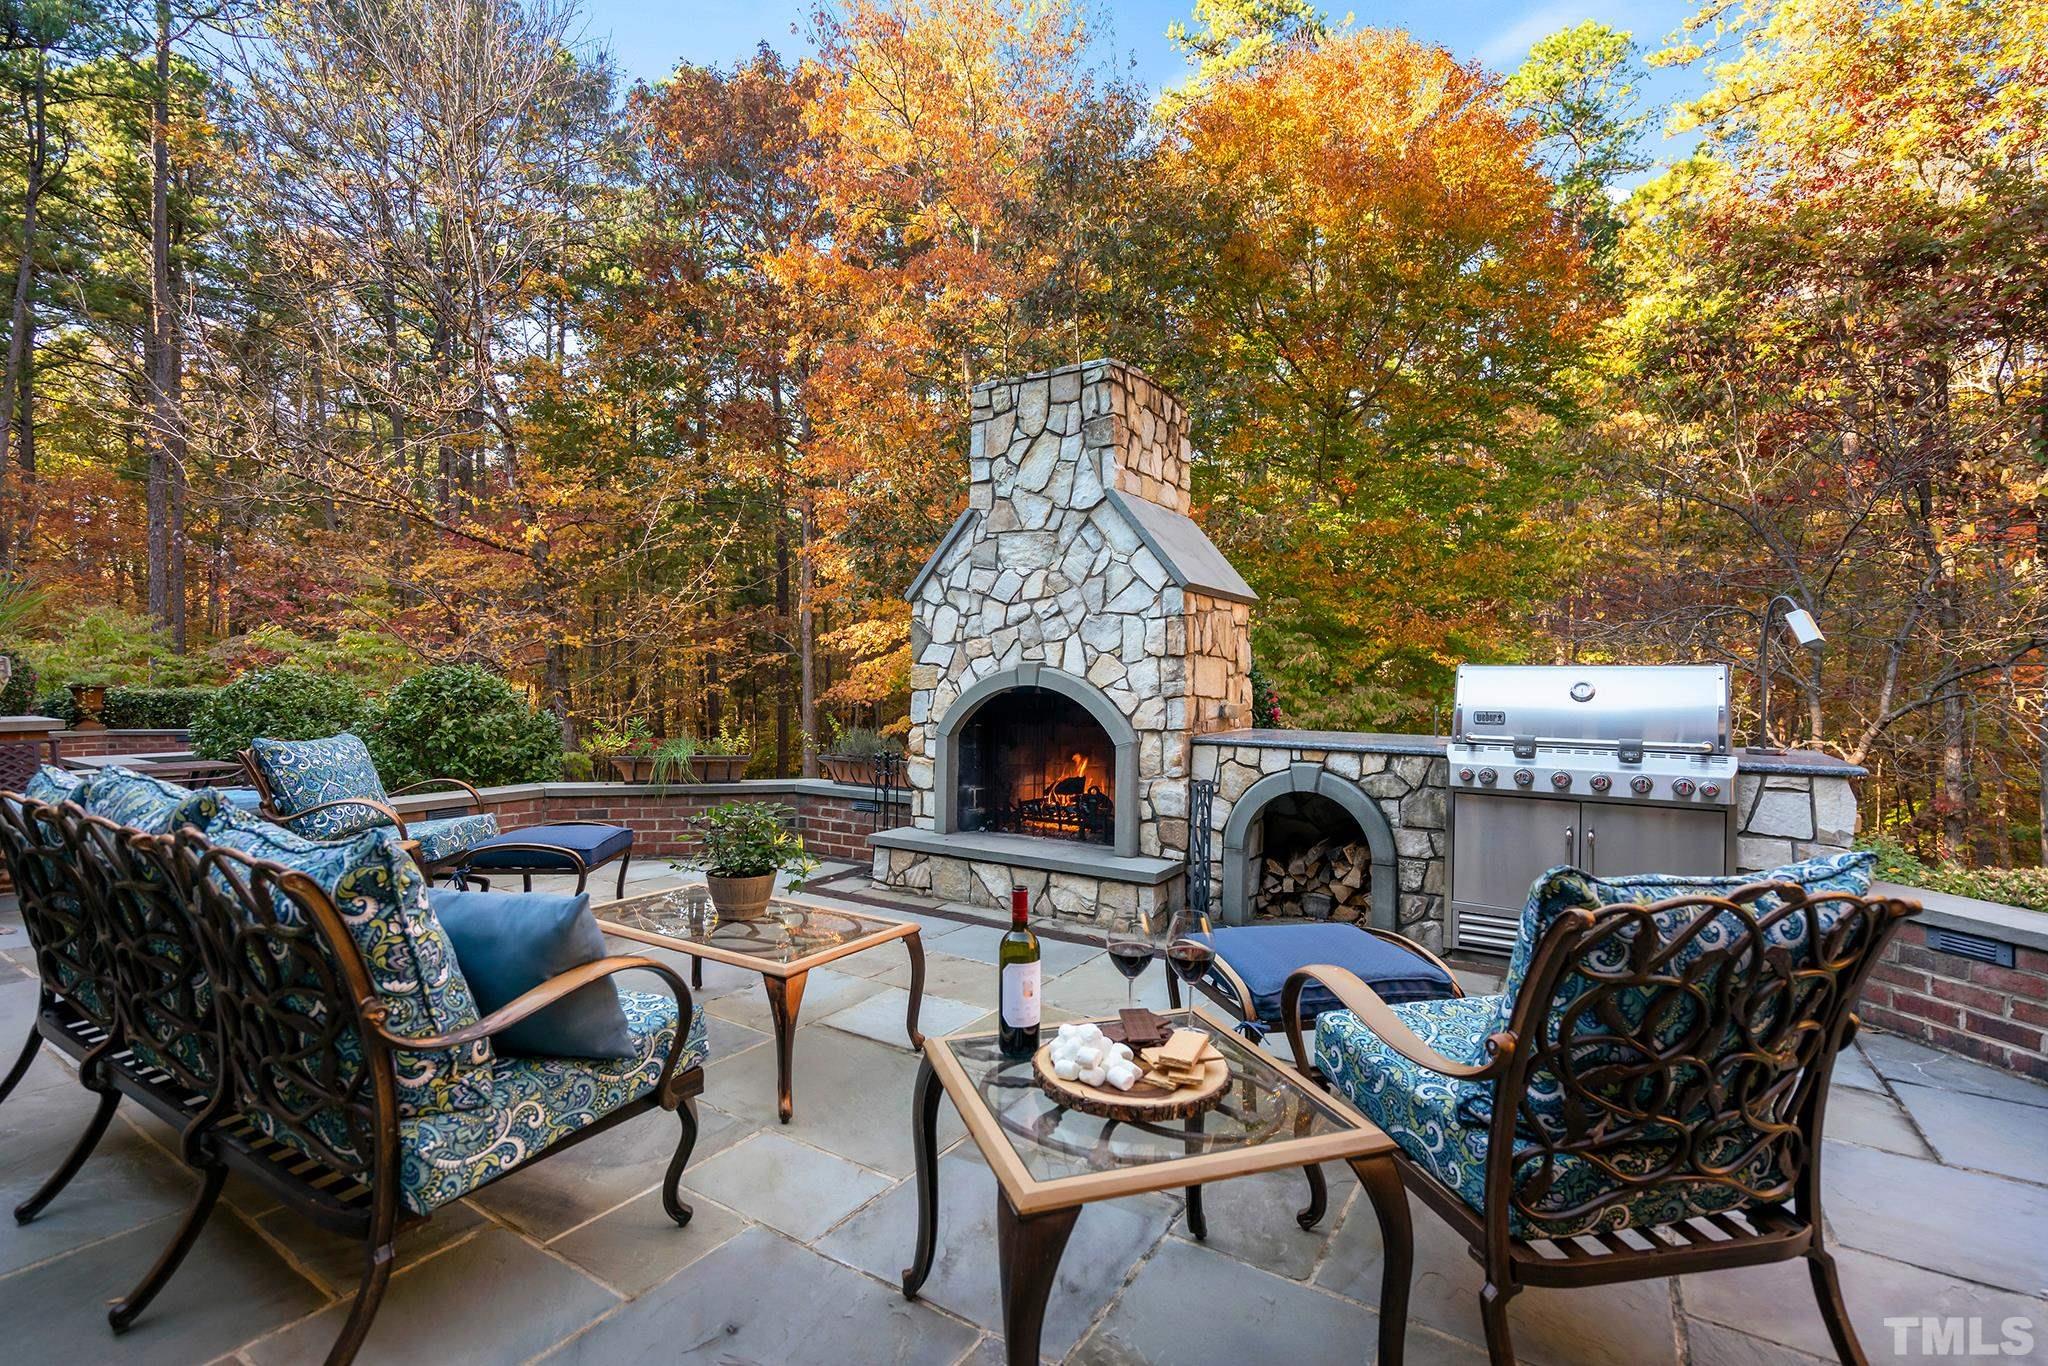 Such a Serene Setting on the Gorgeous Stone Patio With Fireplace ~ Gas Grill ~ Hot Tub